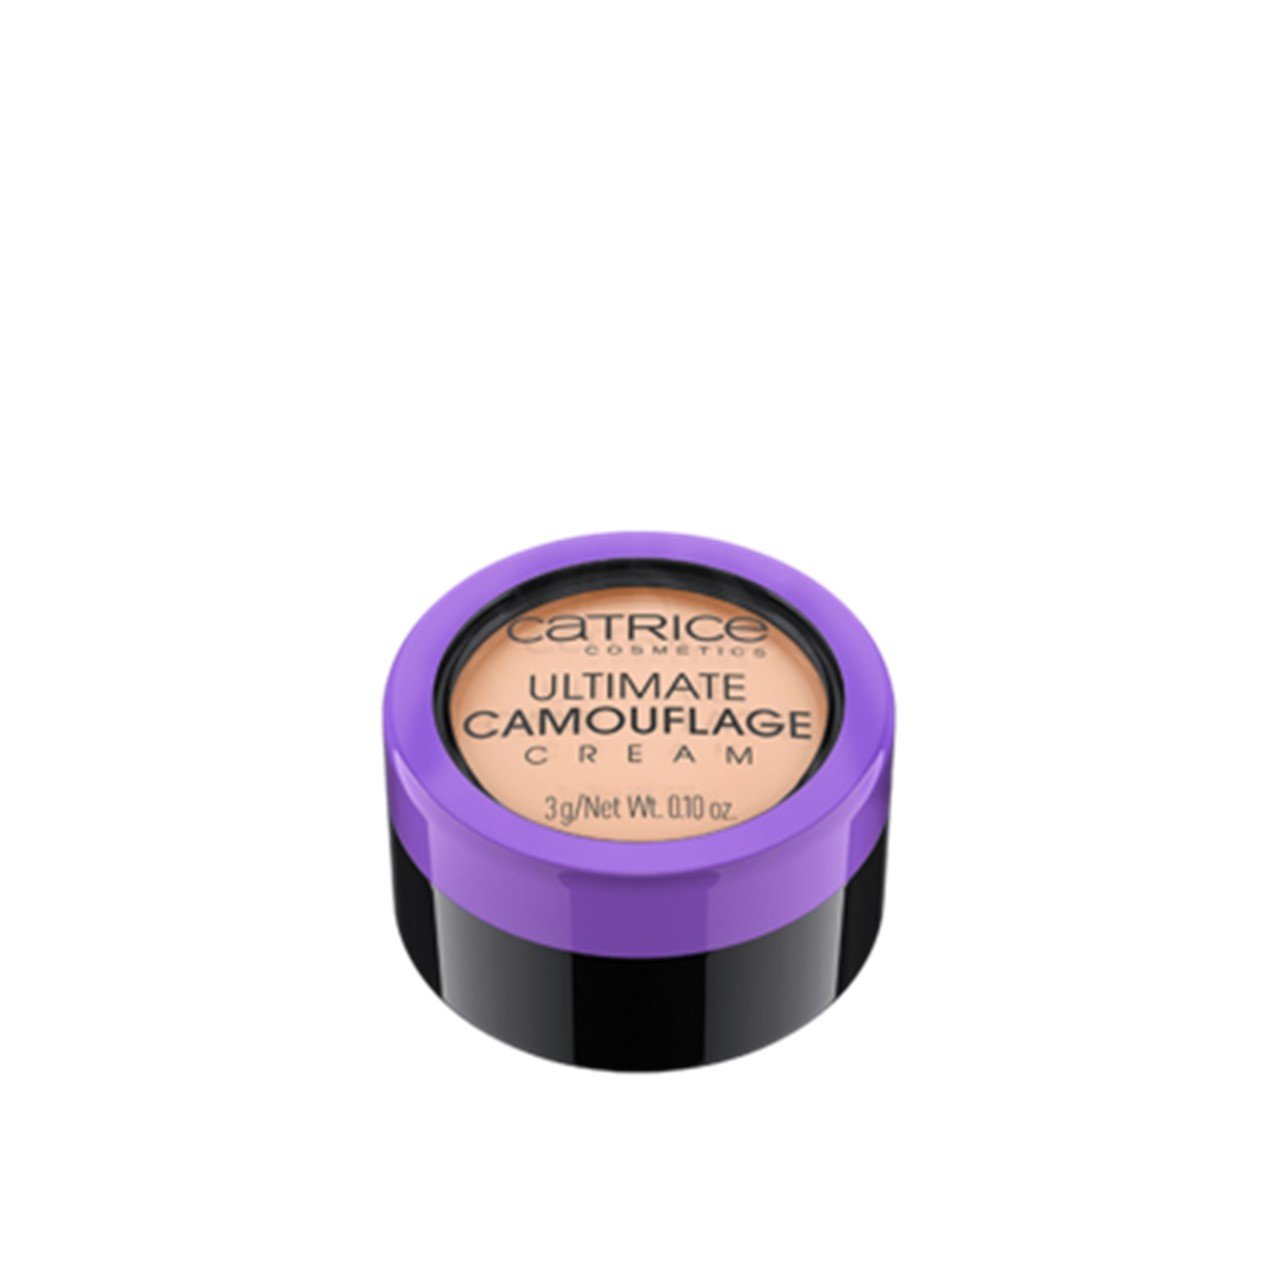 Catrice Ultimate Camouflage Cream 010 N Ivory 3g (0.11oz)